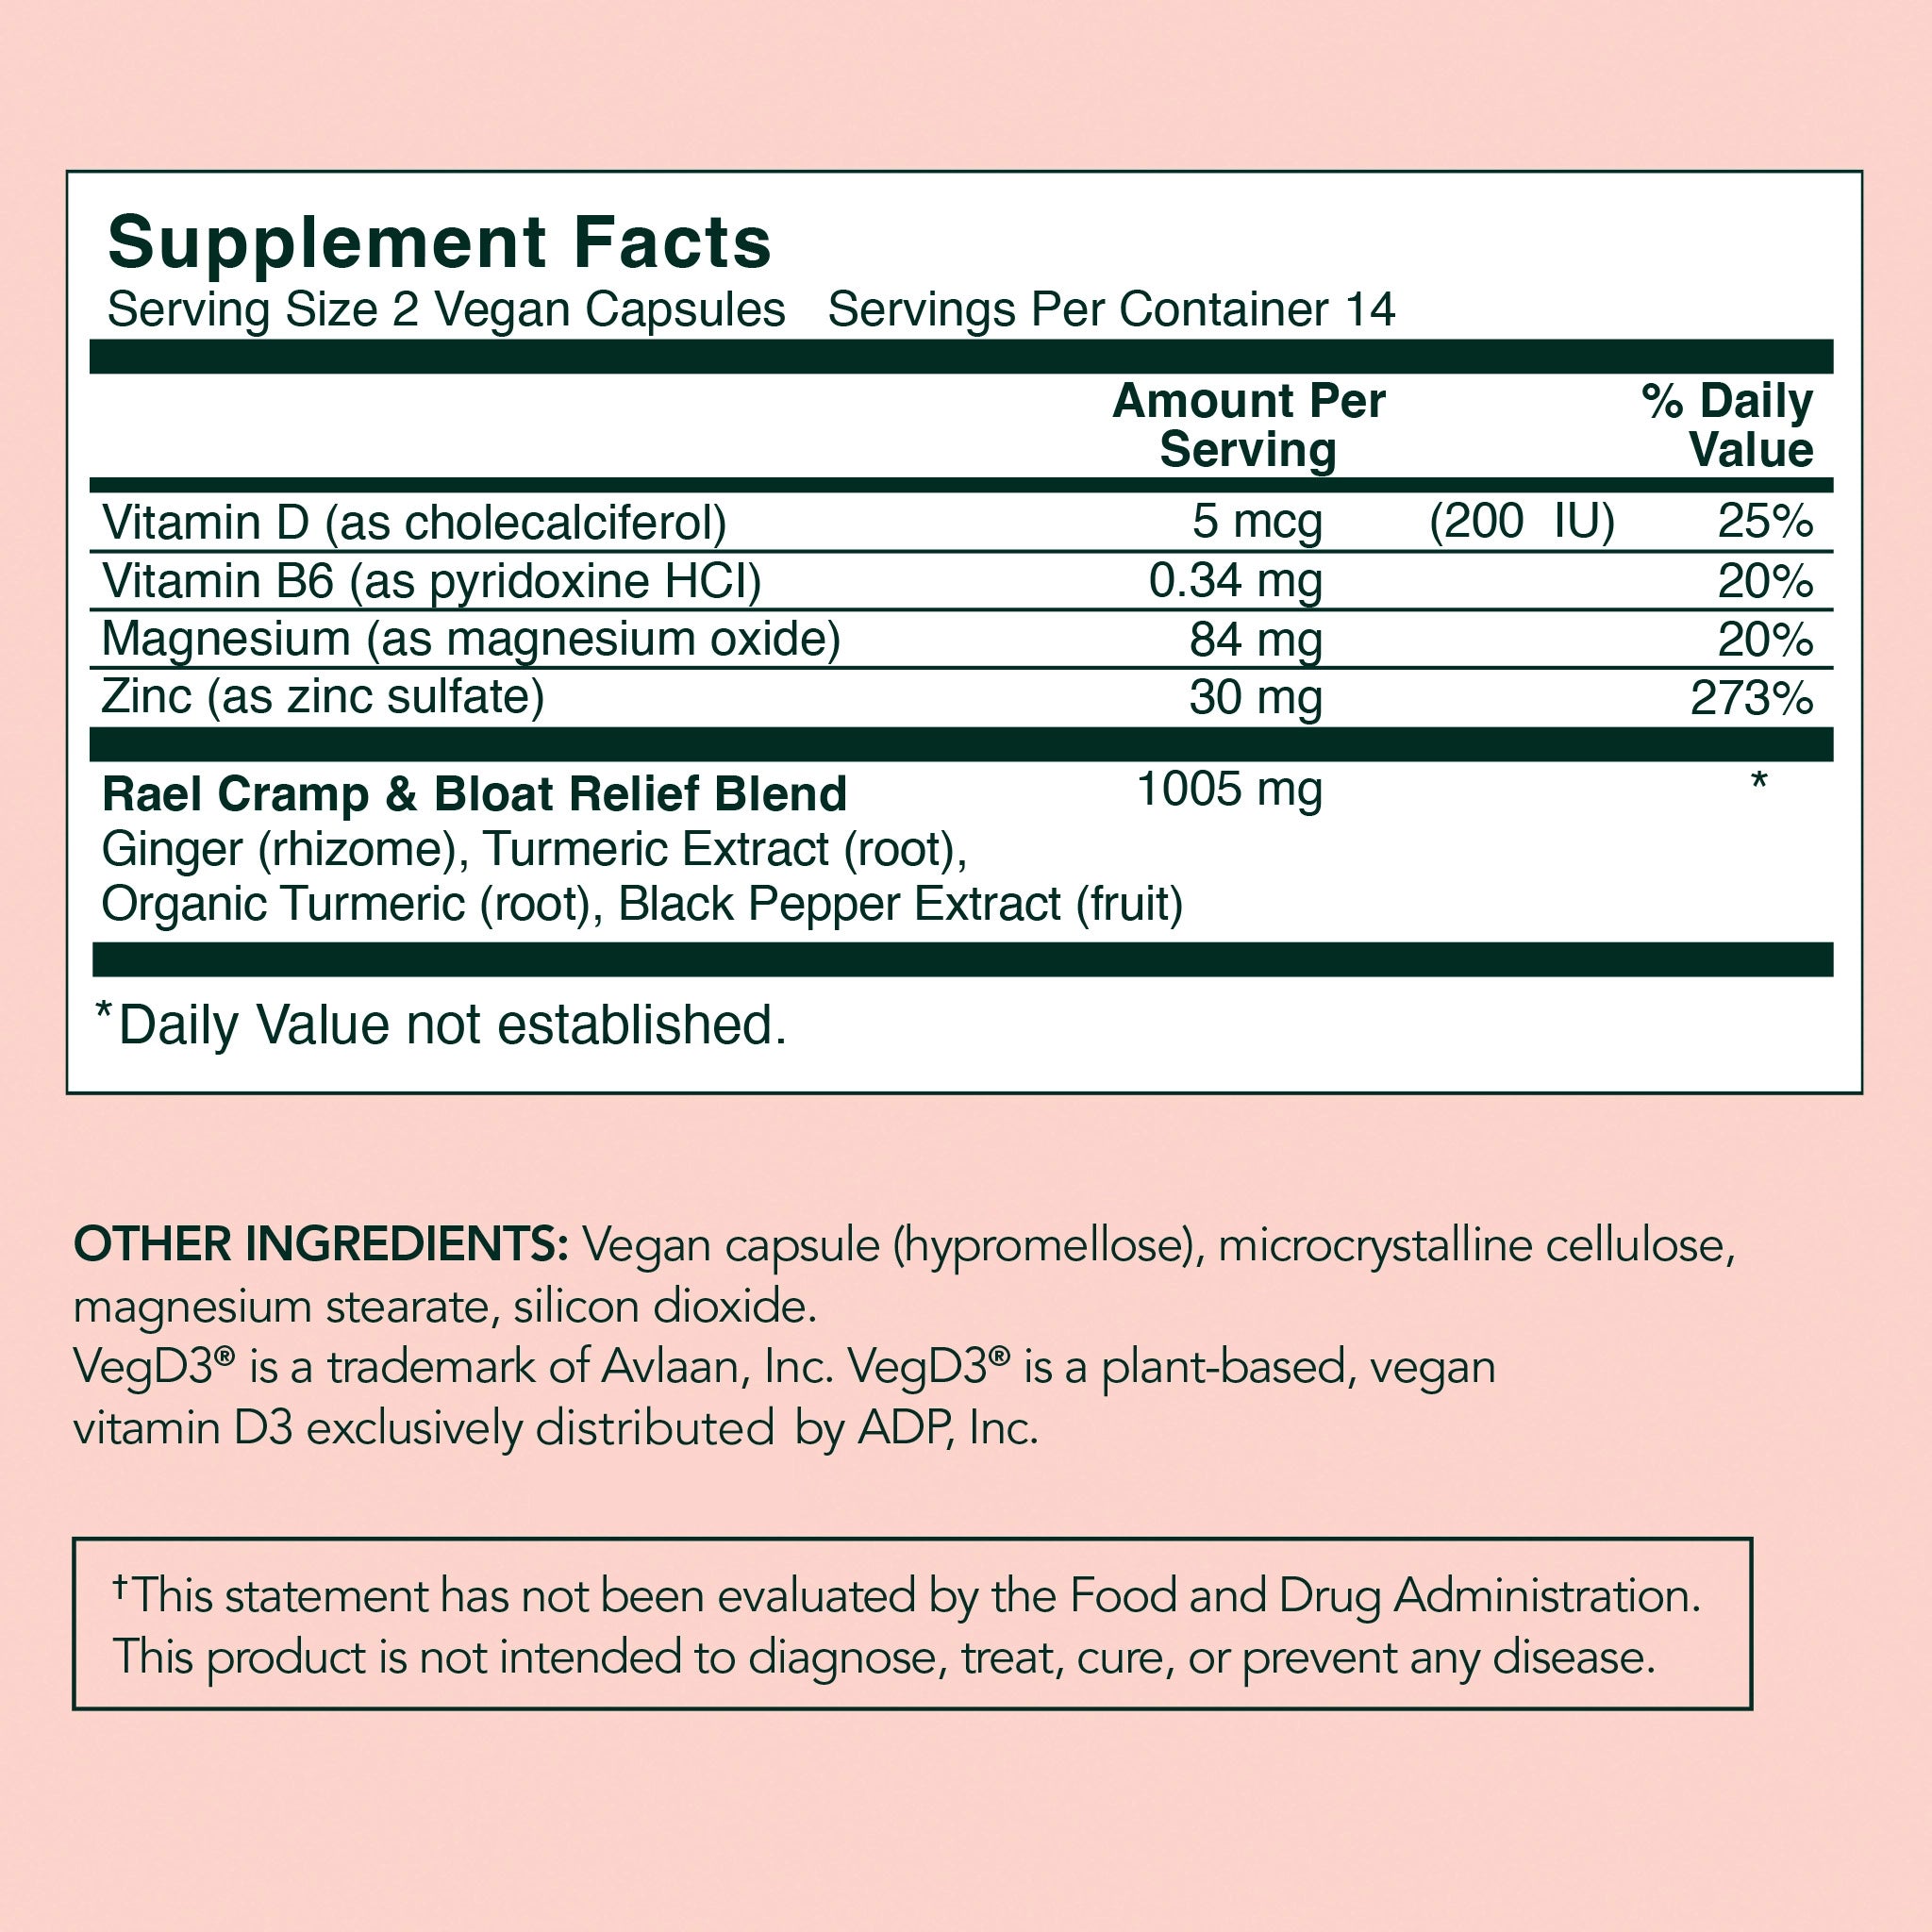 PMS Supplement for Cramp & Bloat Relief Fact Label